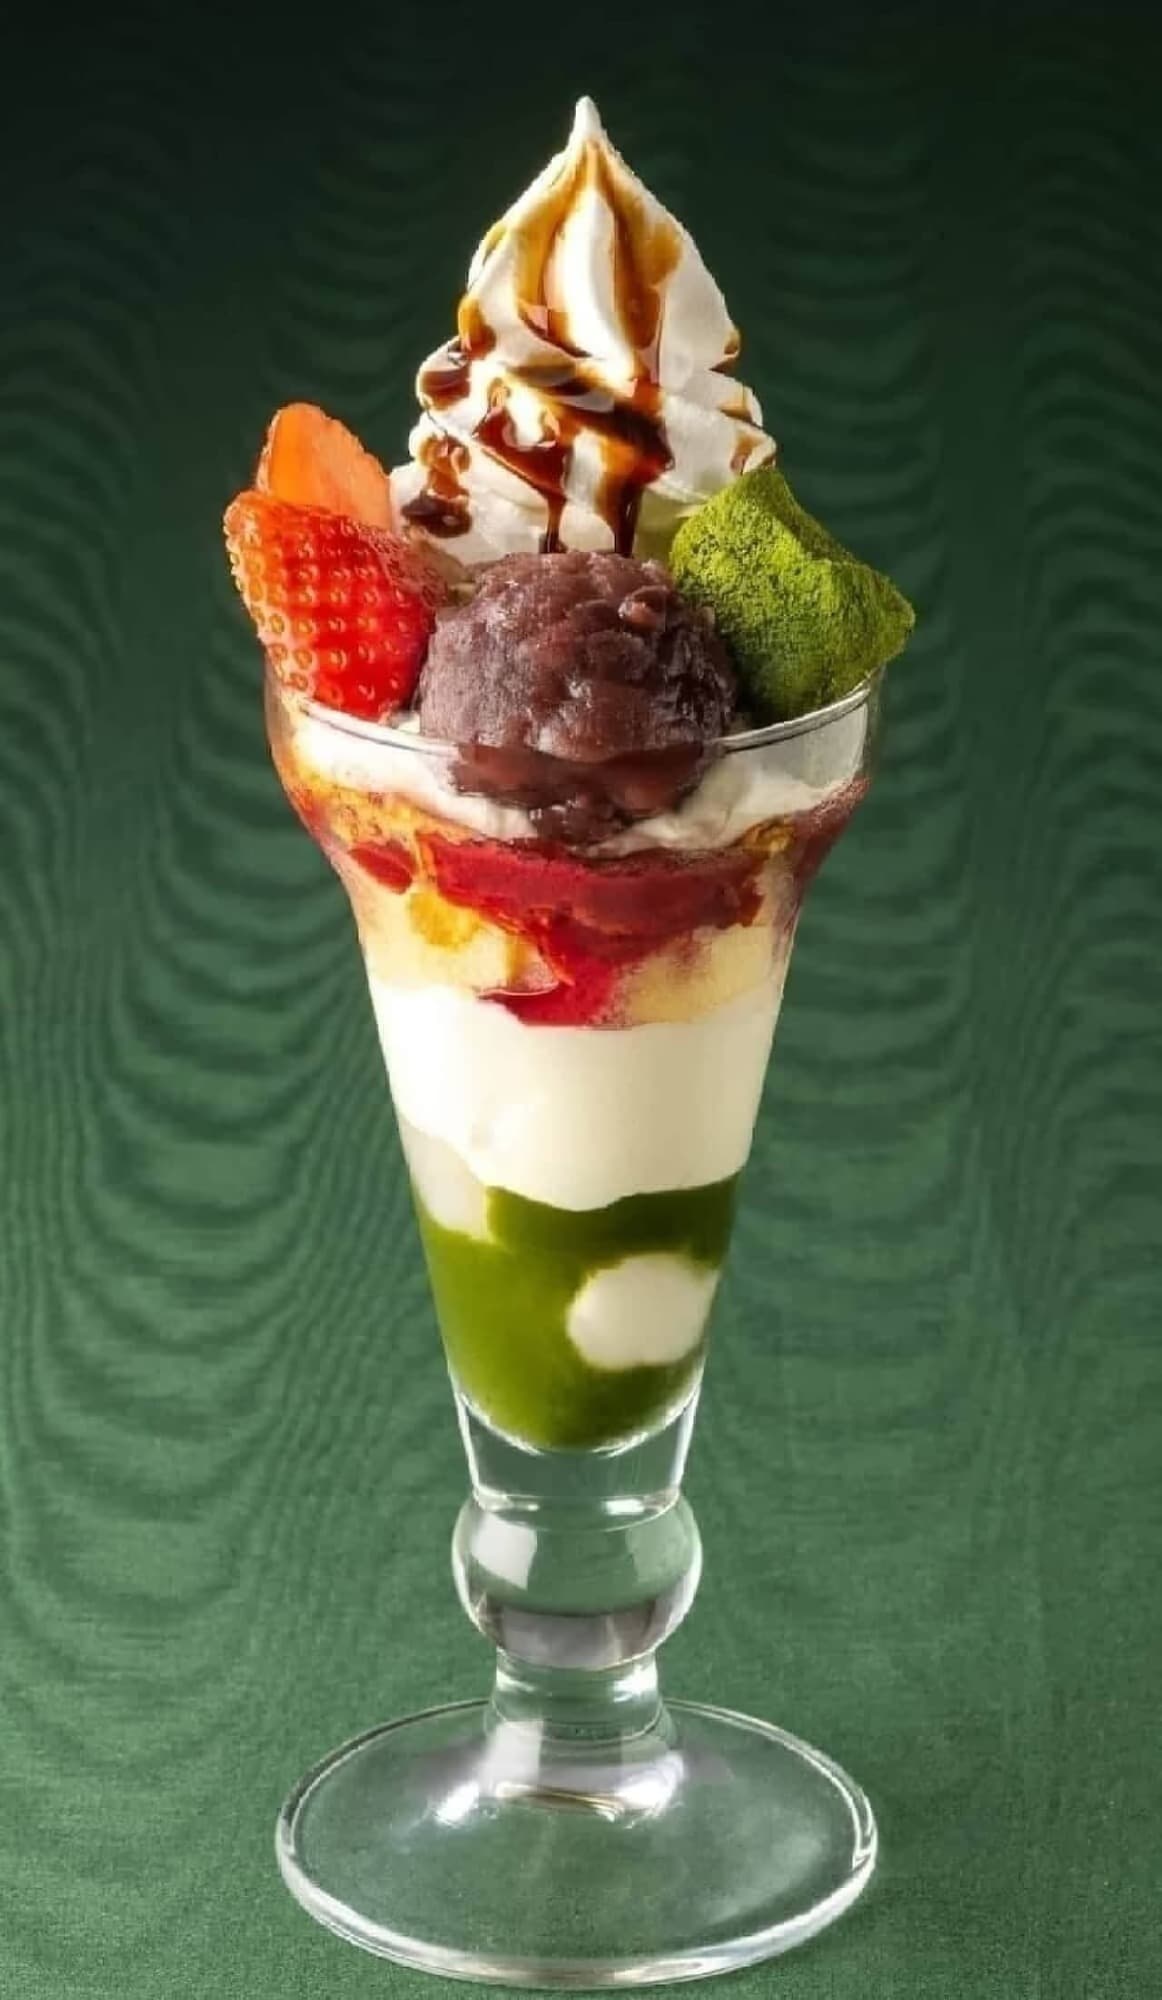 Gusto "Japanese parfait with strawberries and green tea